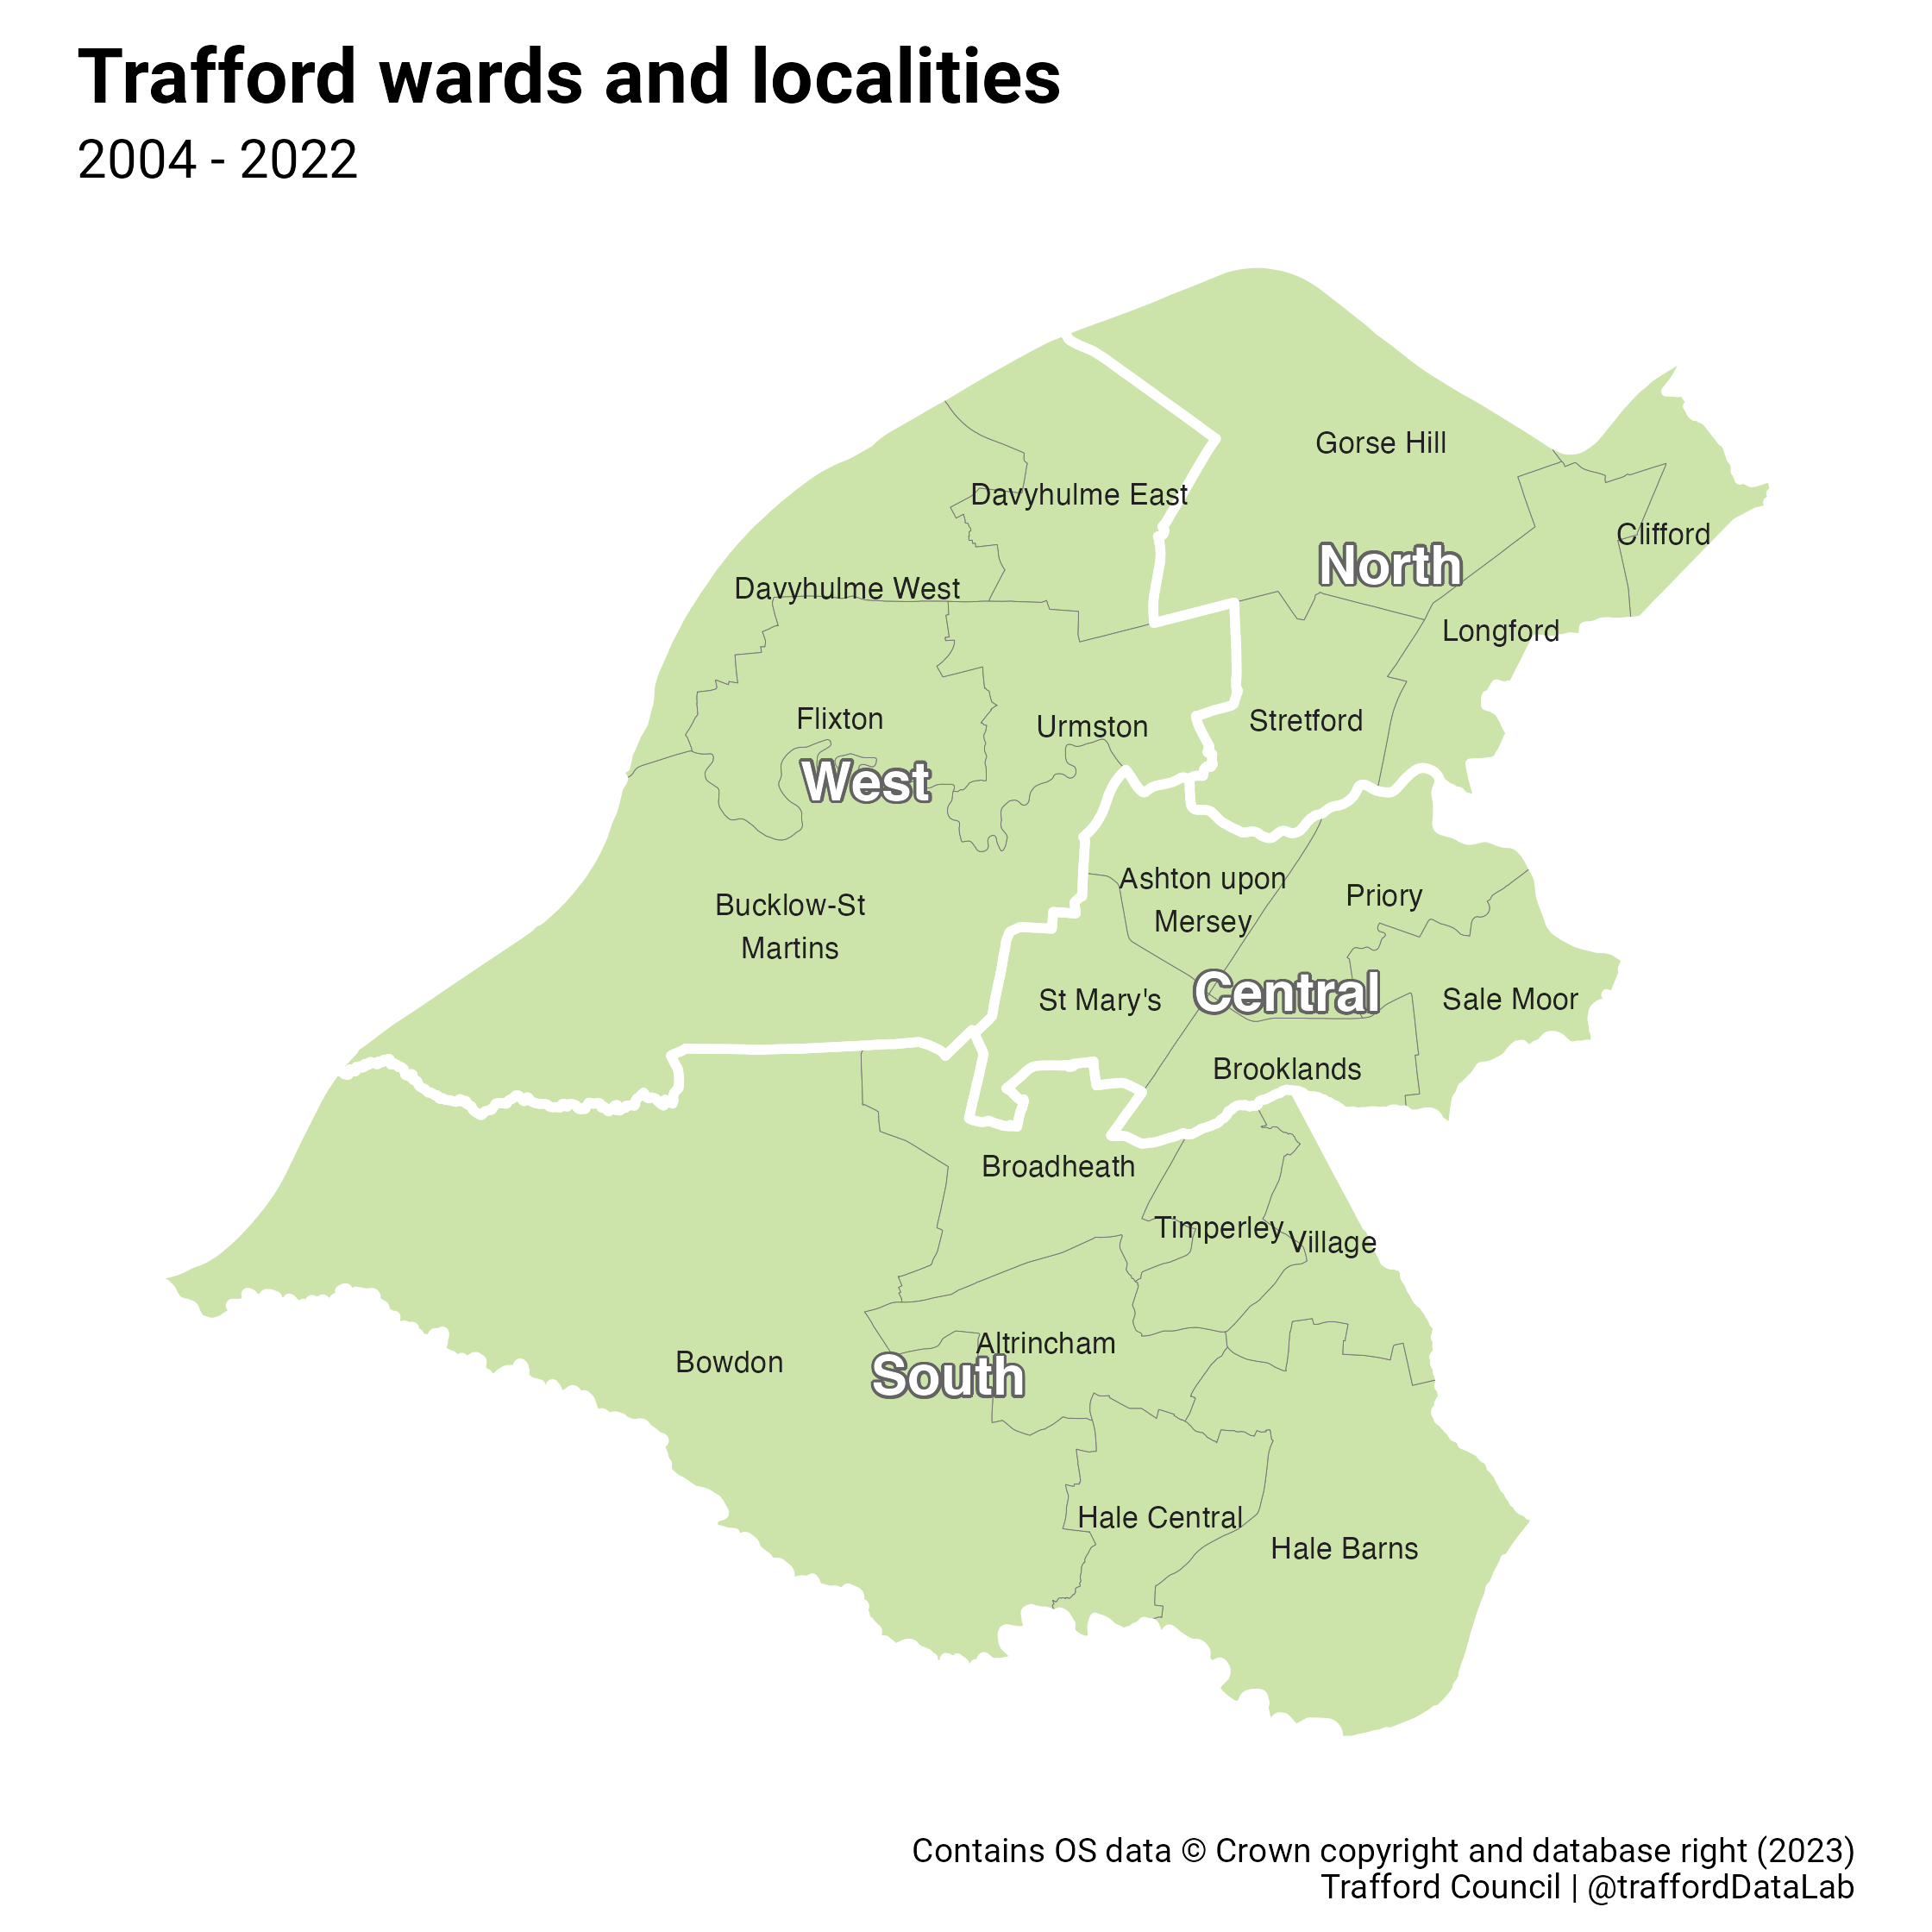 Map of Trafford showing the wards and locality boundaries from 2004 to 2022.